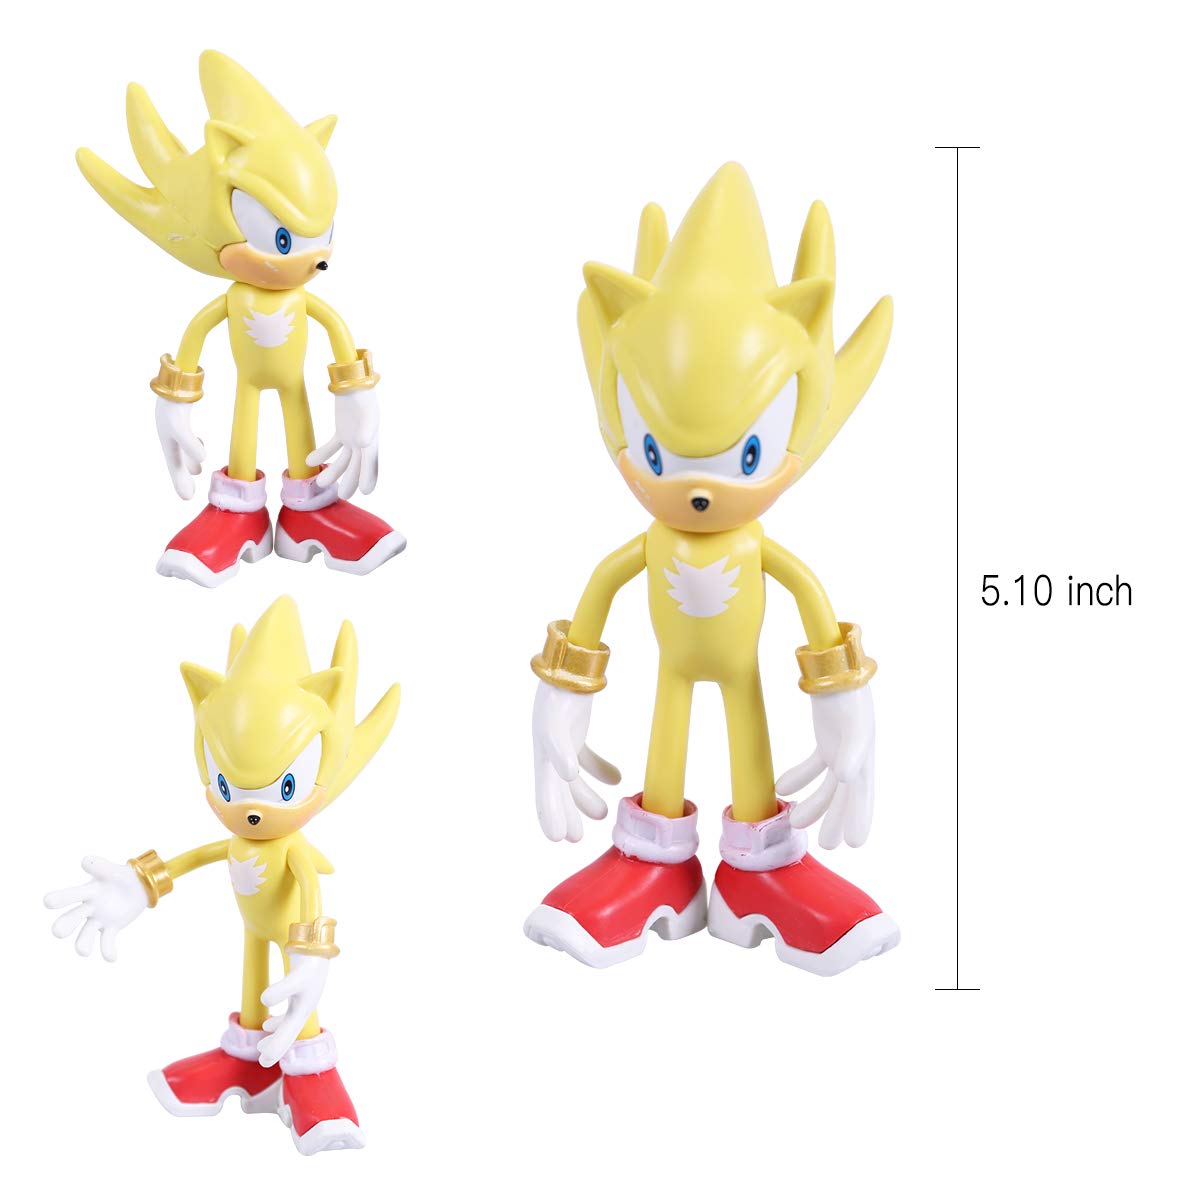 Max Fun Sonic The Hedgehog Action Figures with Movable Joint Playsets Toys, 4.7'' Tall Cake Toppers Kids Gift (Pack of 5)